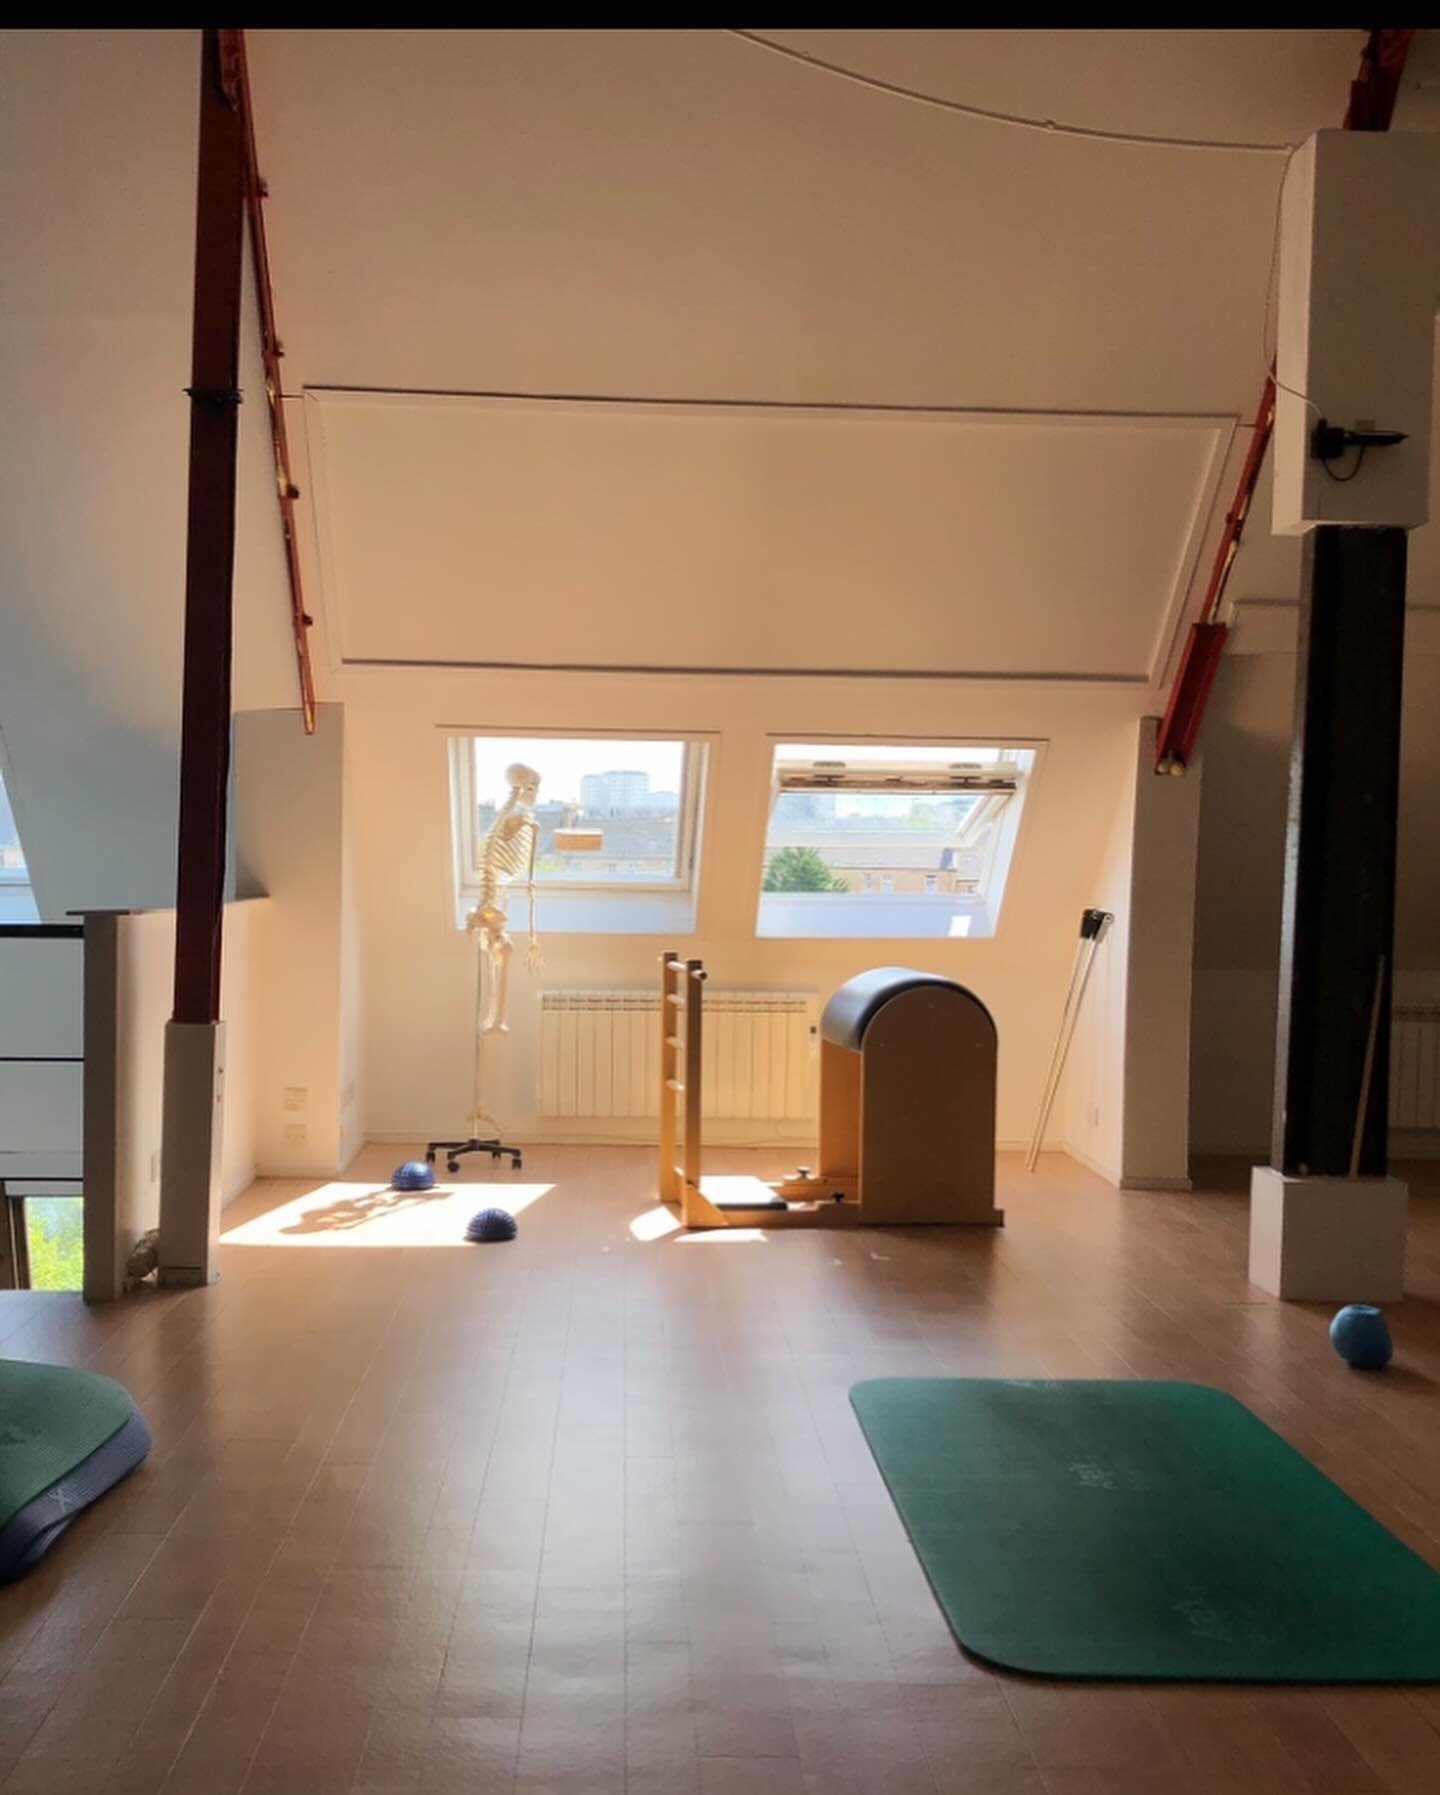 NEW CLASS ALERT 🔔

I have a new Beginner class starting @otago_street_pilates  on Monday evenings at 5:45-6:45pm. The first session will be on 13th May and is now live to book on Gymcatch! 

This class is suited to complete beginners as we start wit